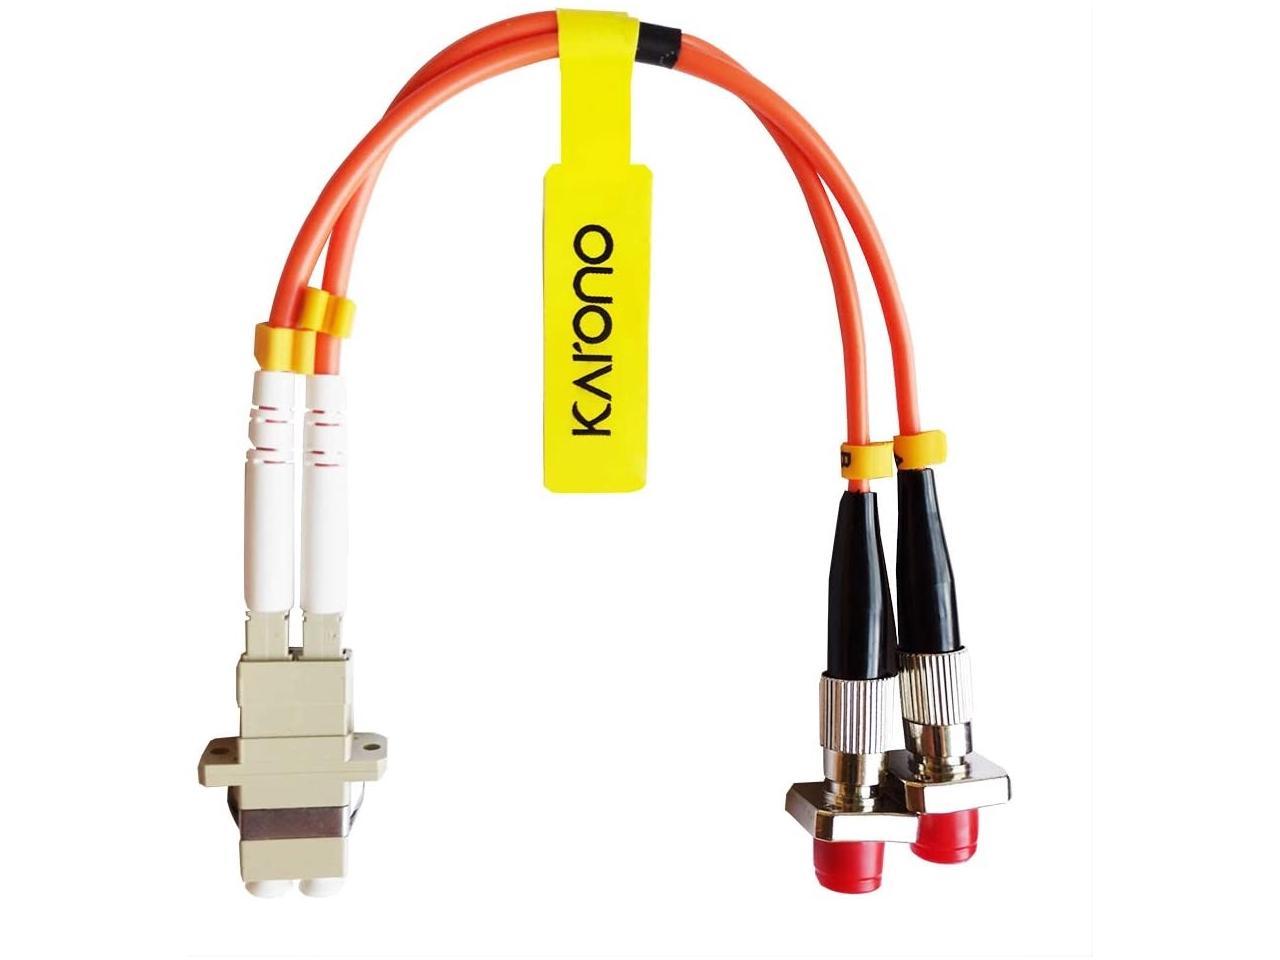 Hybrid Connector Coupler Converter Dongle Male & Female Mutual Transfer Singlemode 9/125 Simplex Fiber Optic Cable Karono LC to SC On-line Transfer Adapter Cable Fiber Optic Adapter 